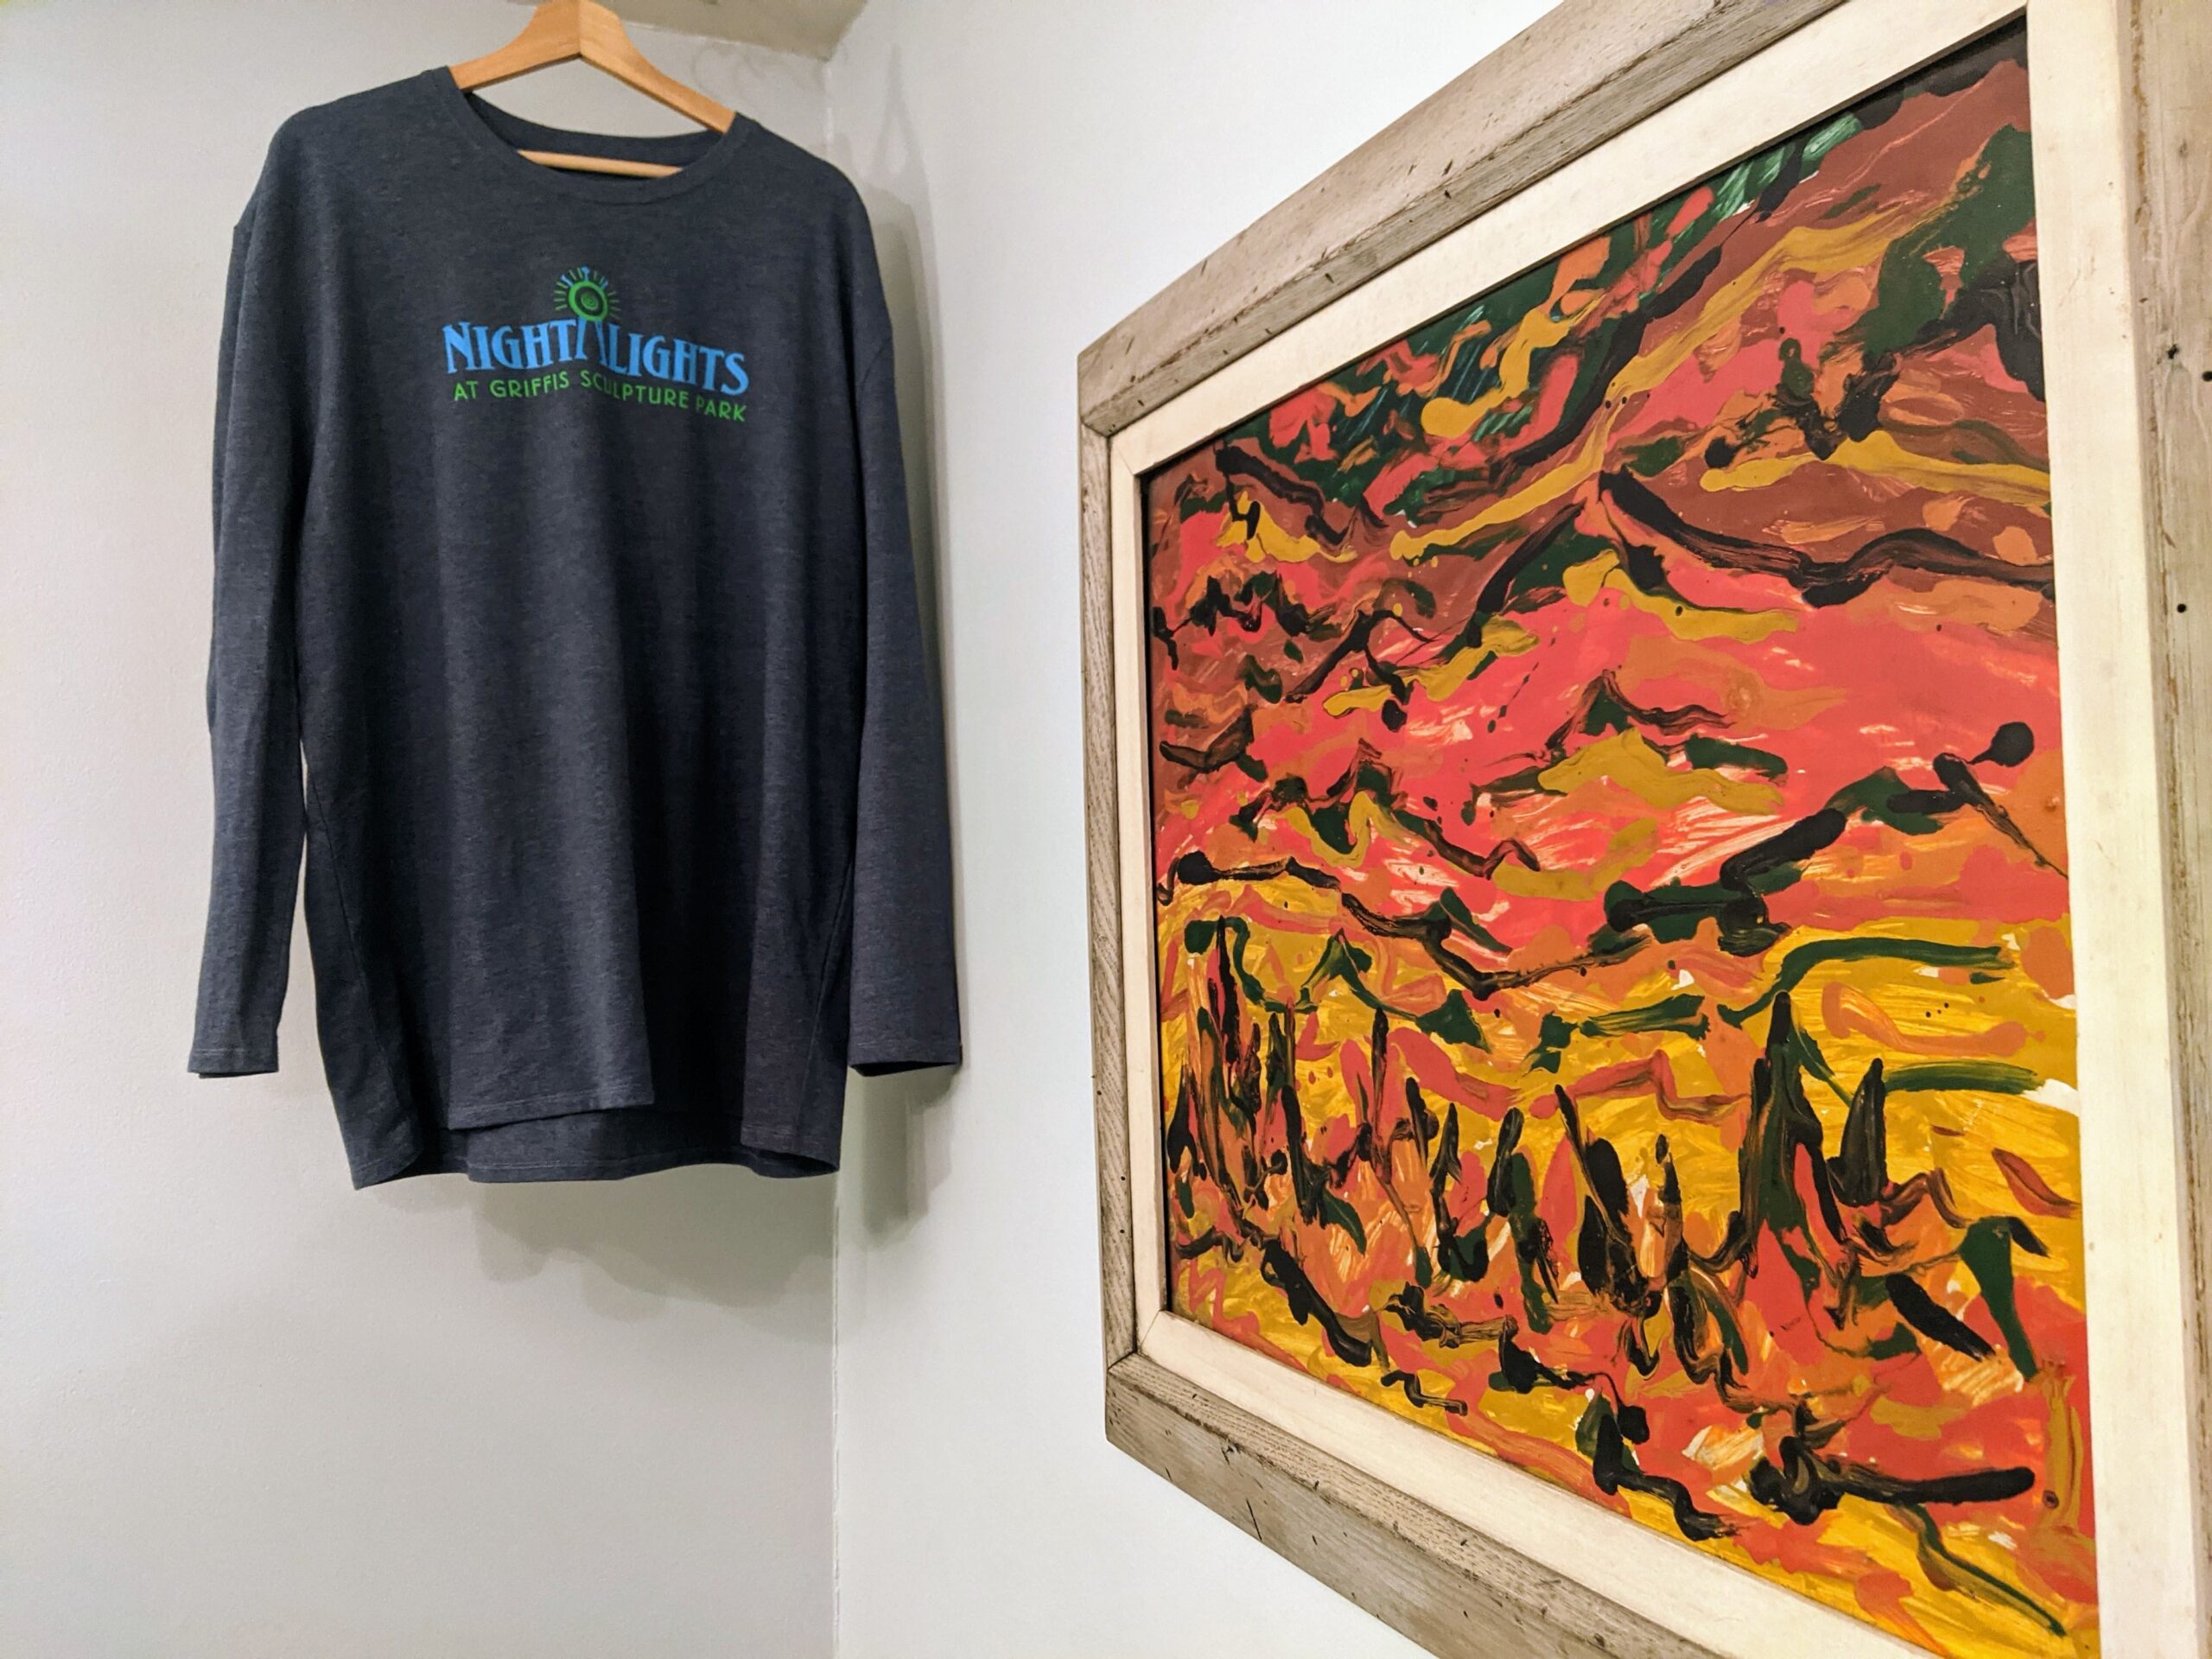 NIGHT LIGHTS at Griffis Sculpture Park long-sleeve t-shirts available